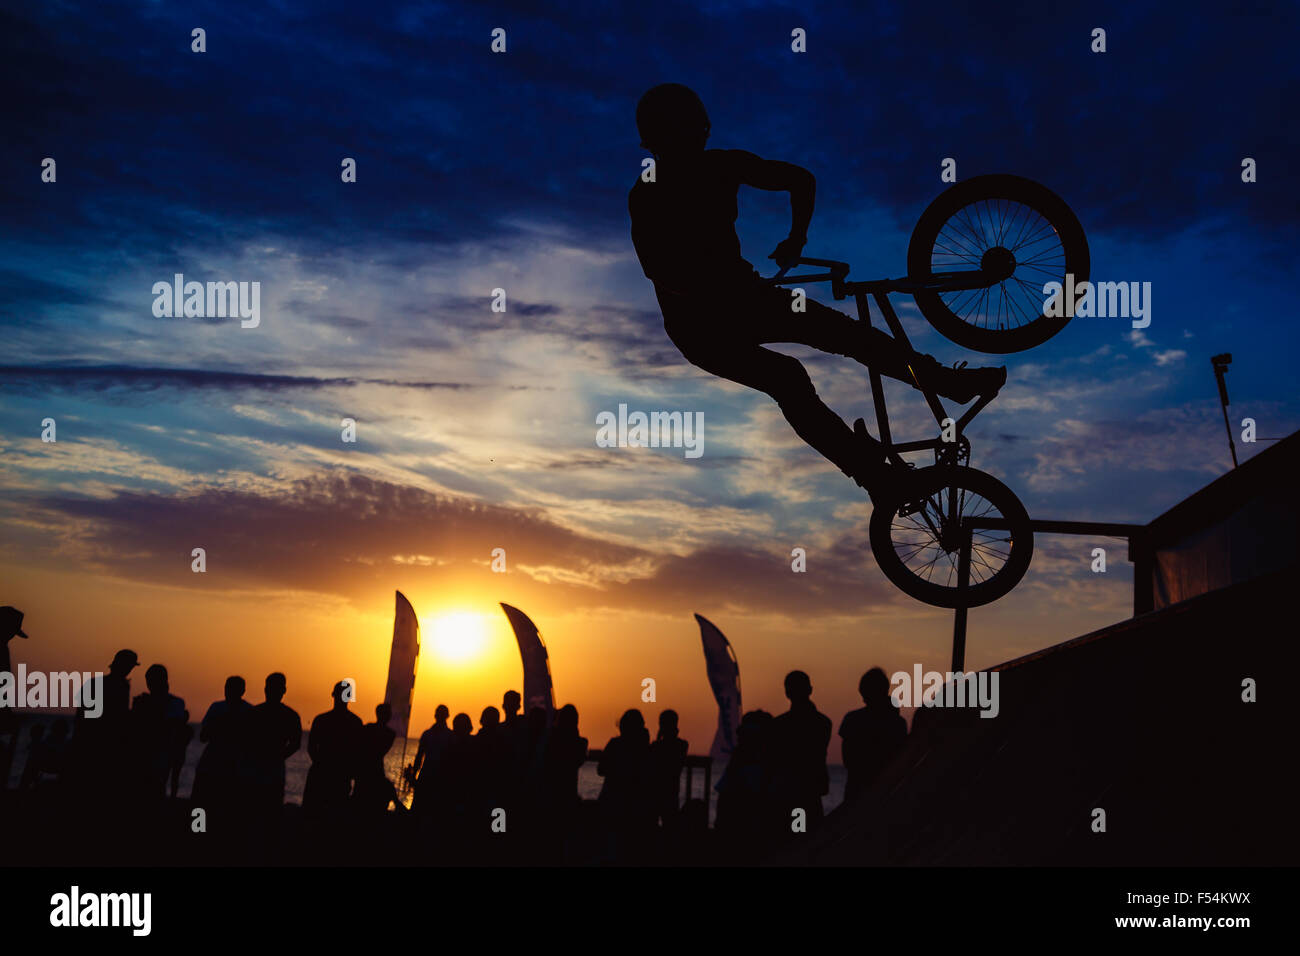 Silhouette of man doing extreme jump with bike Stock Photo